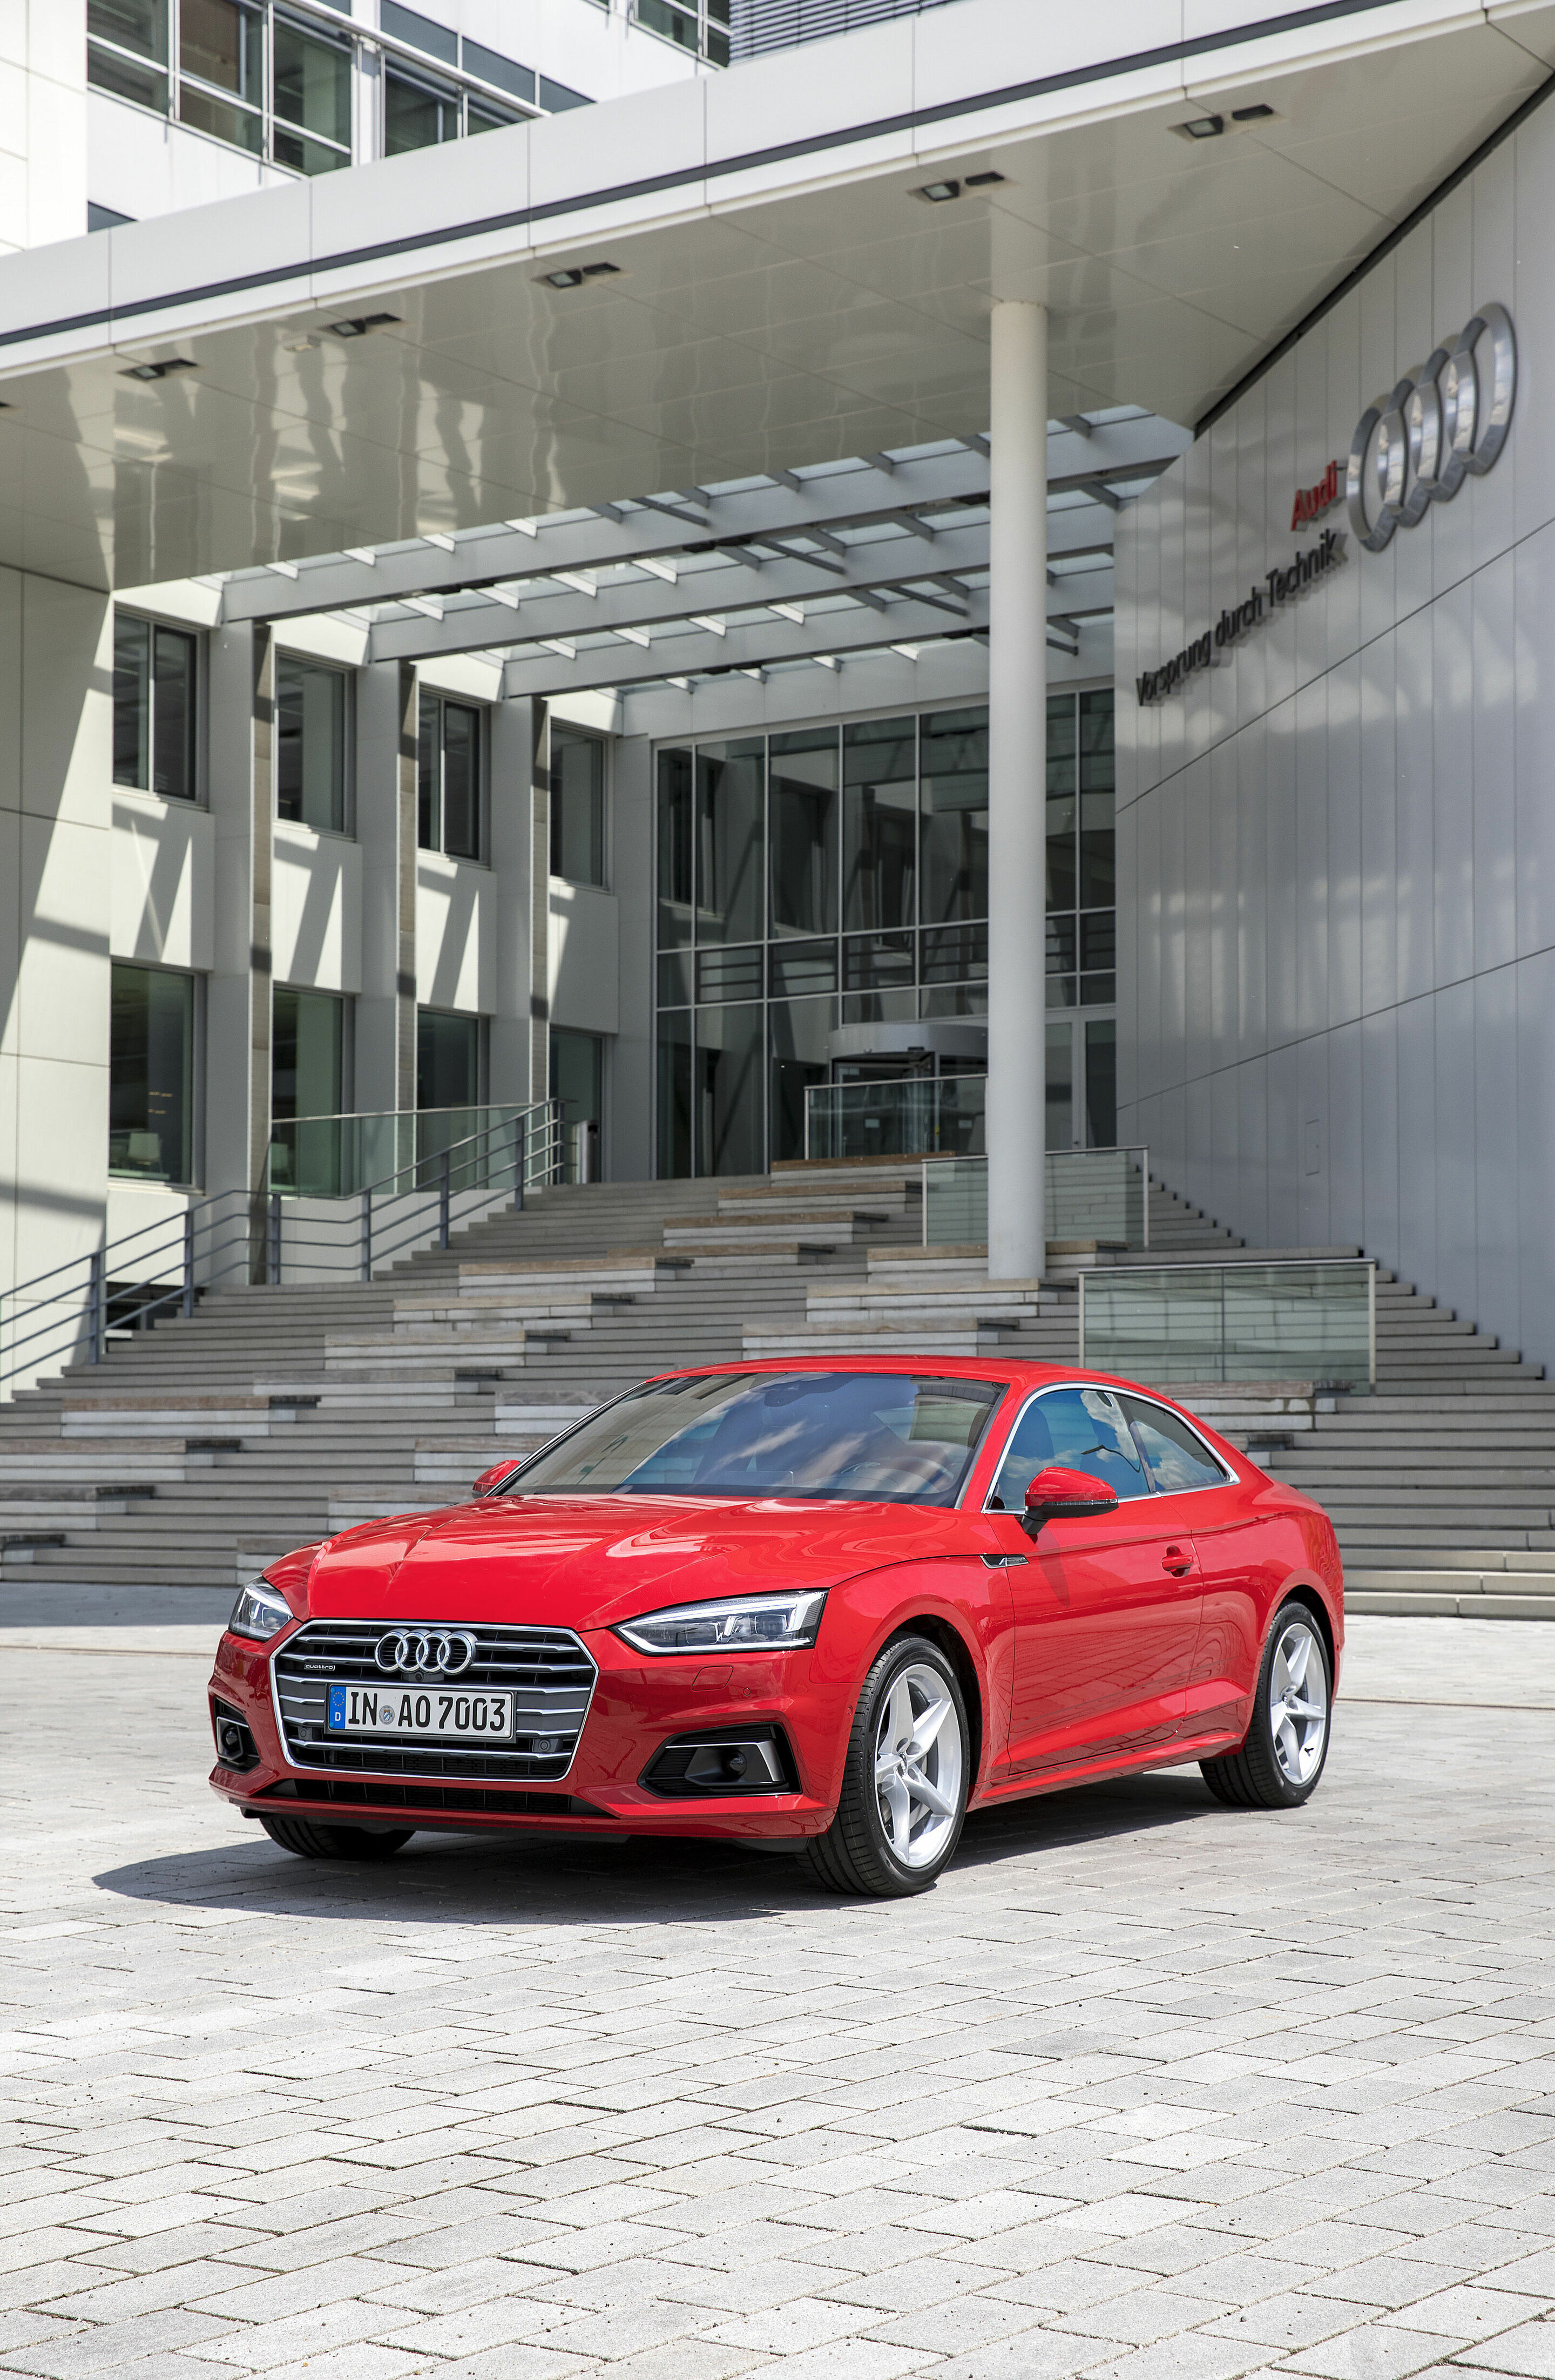 Audi S5 Coupé at the “SE Building“  of the Technical Development at the Headquarters in Ingolstadt